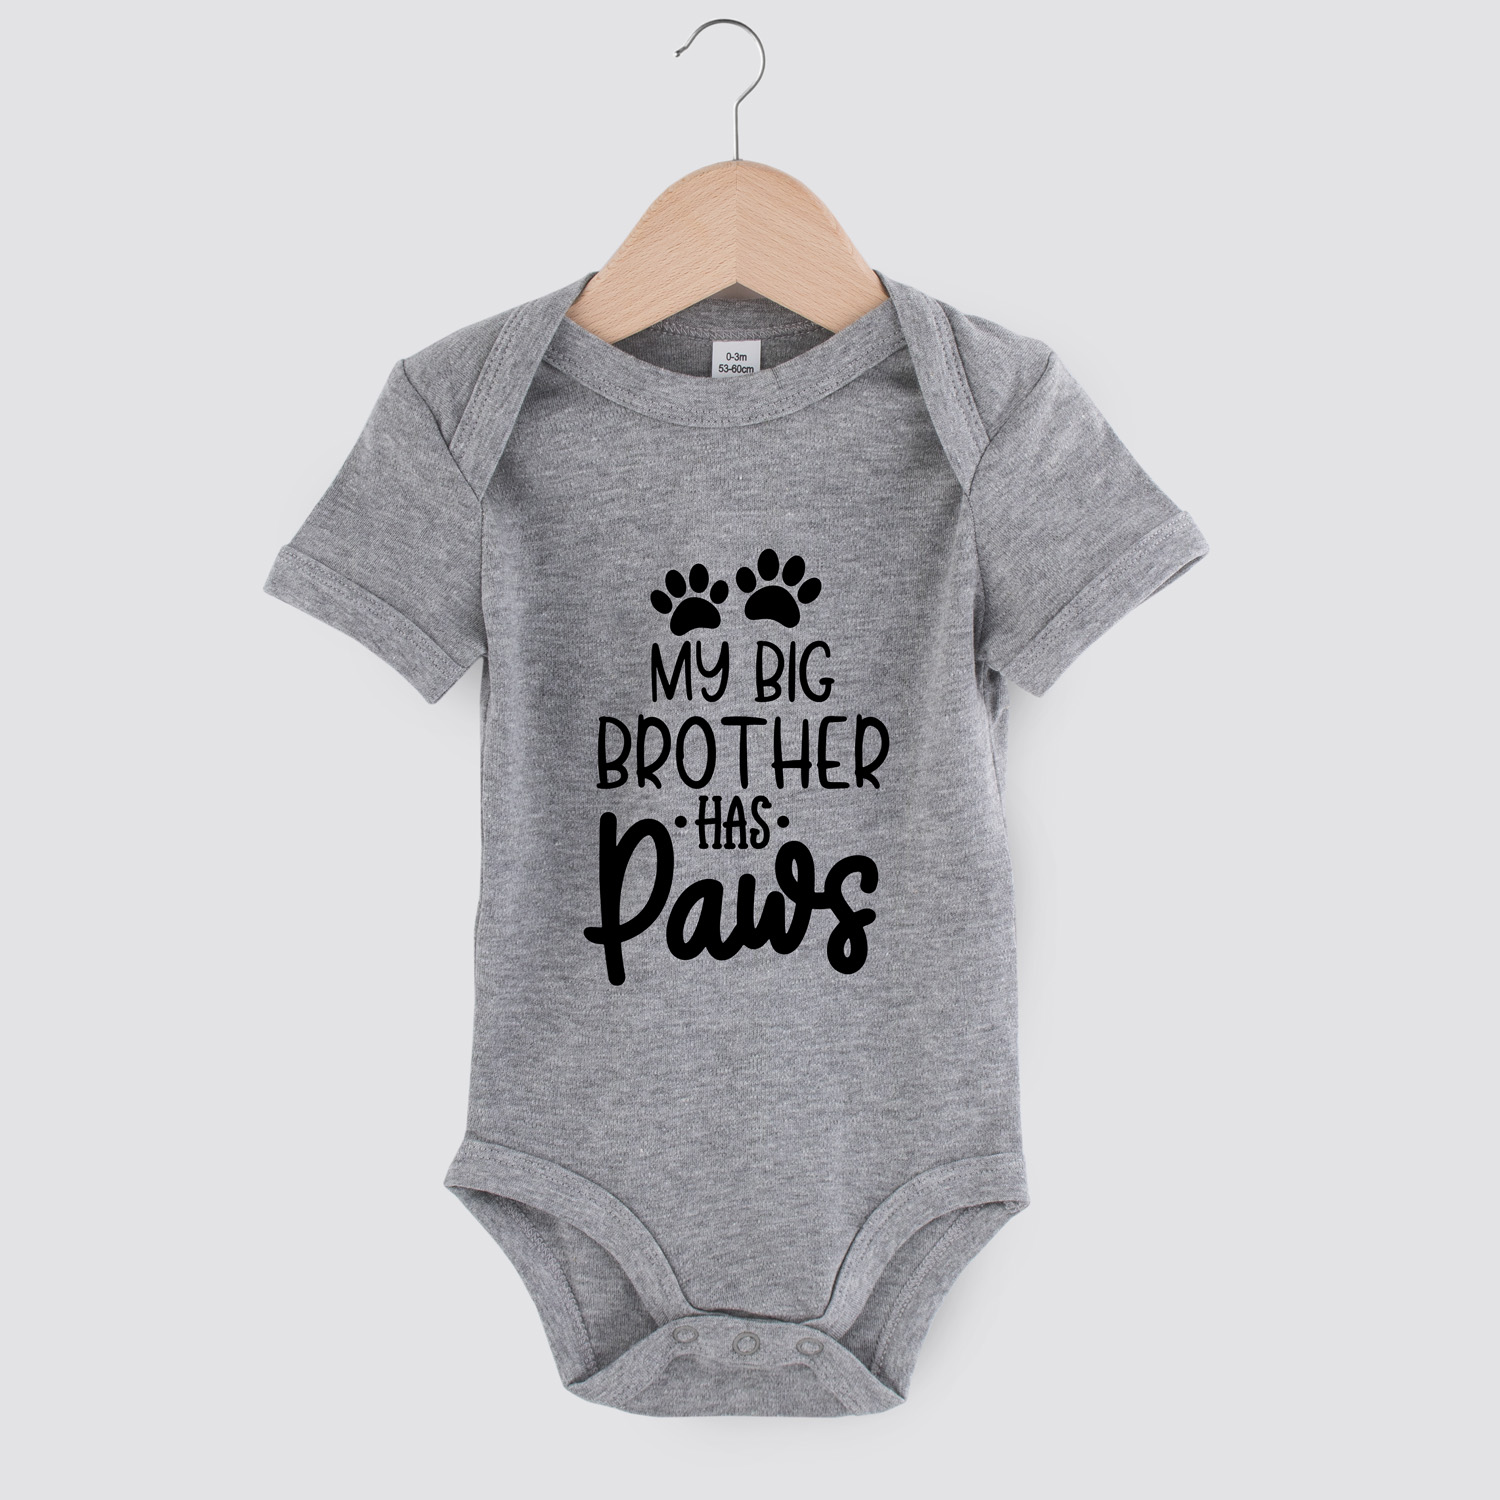 My big brother has paws | Baby romper | my fabulous life.